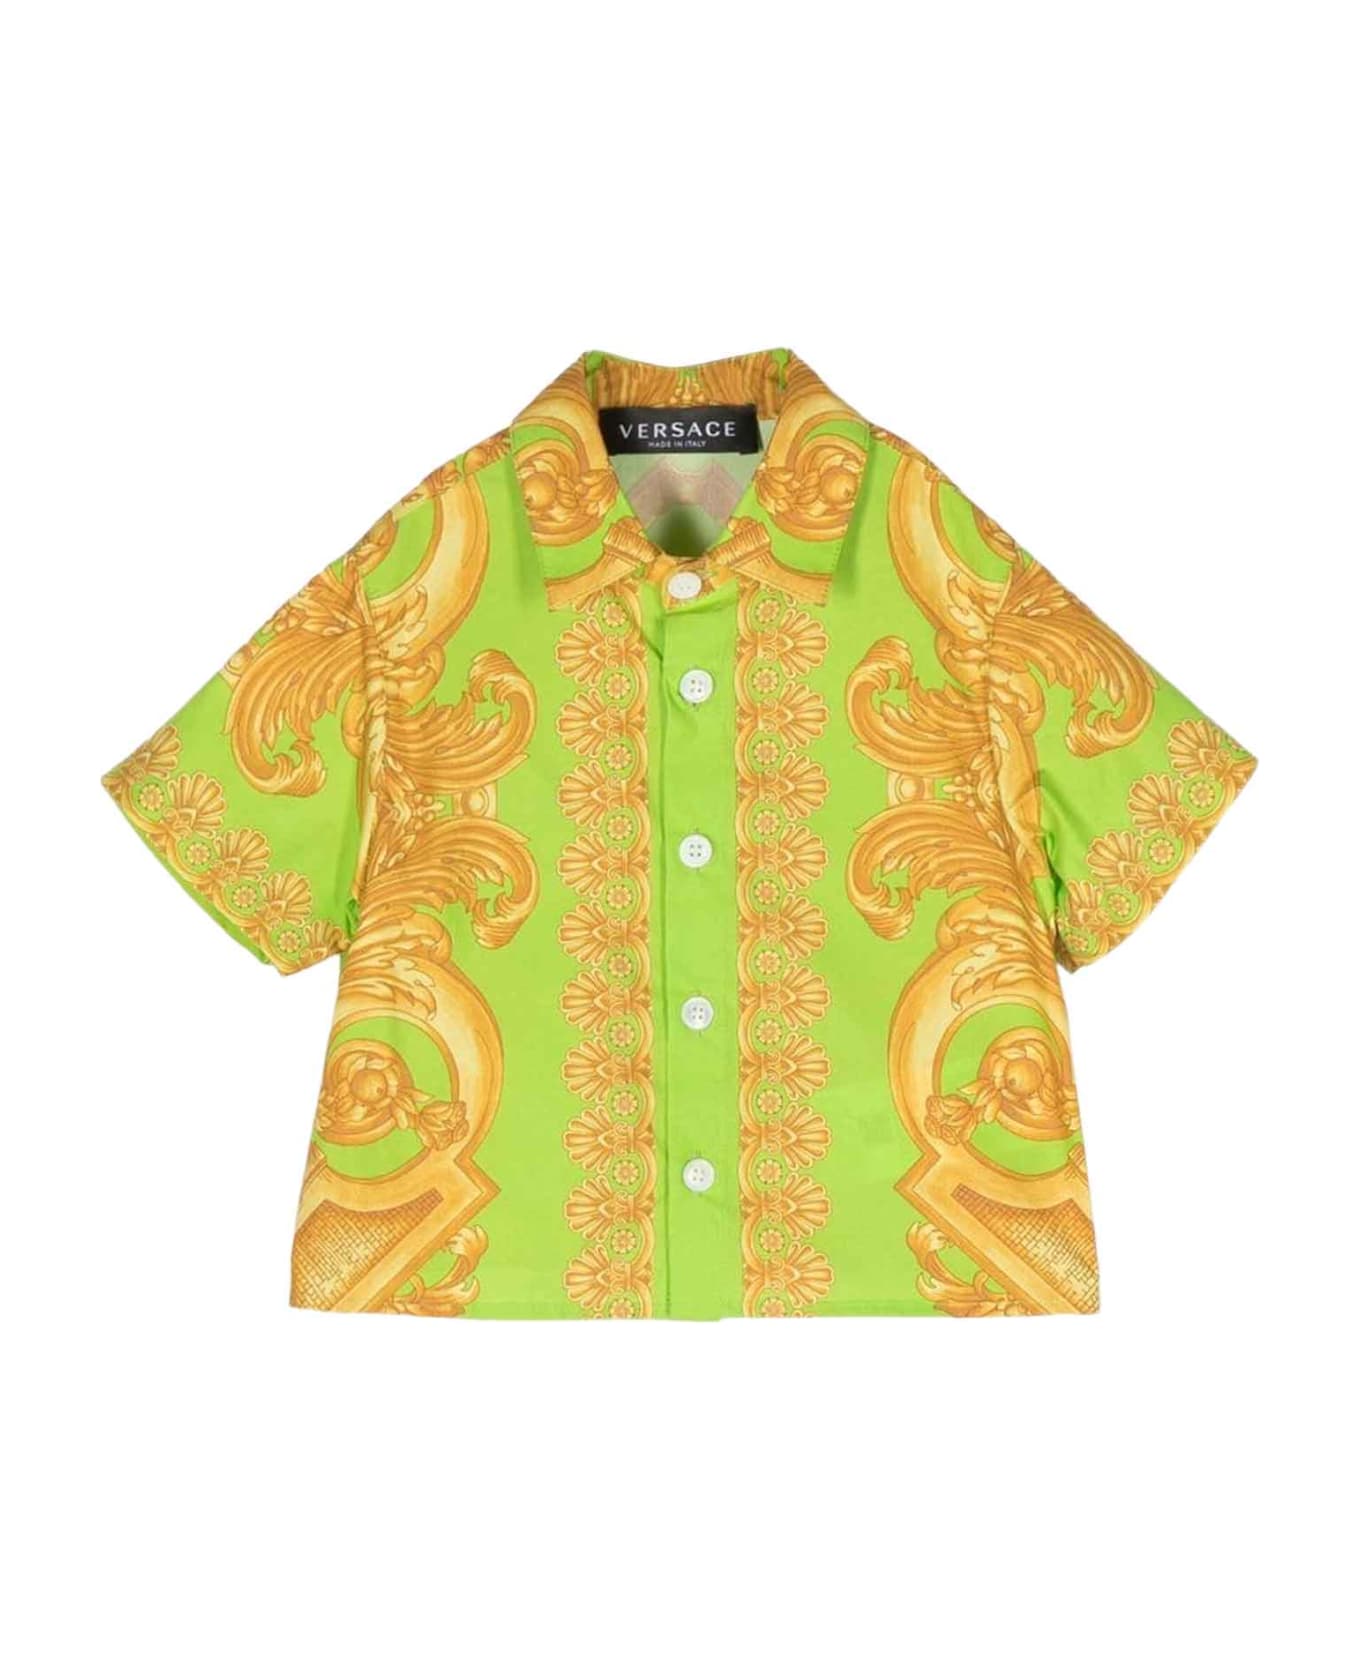 Versace Lime Shirt Baby Unisex Kids - lime/oro